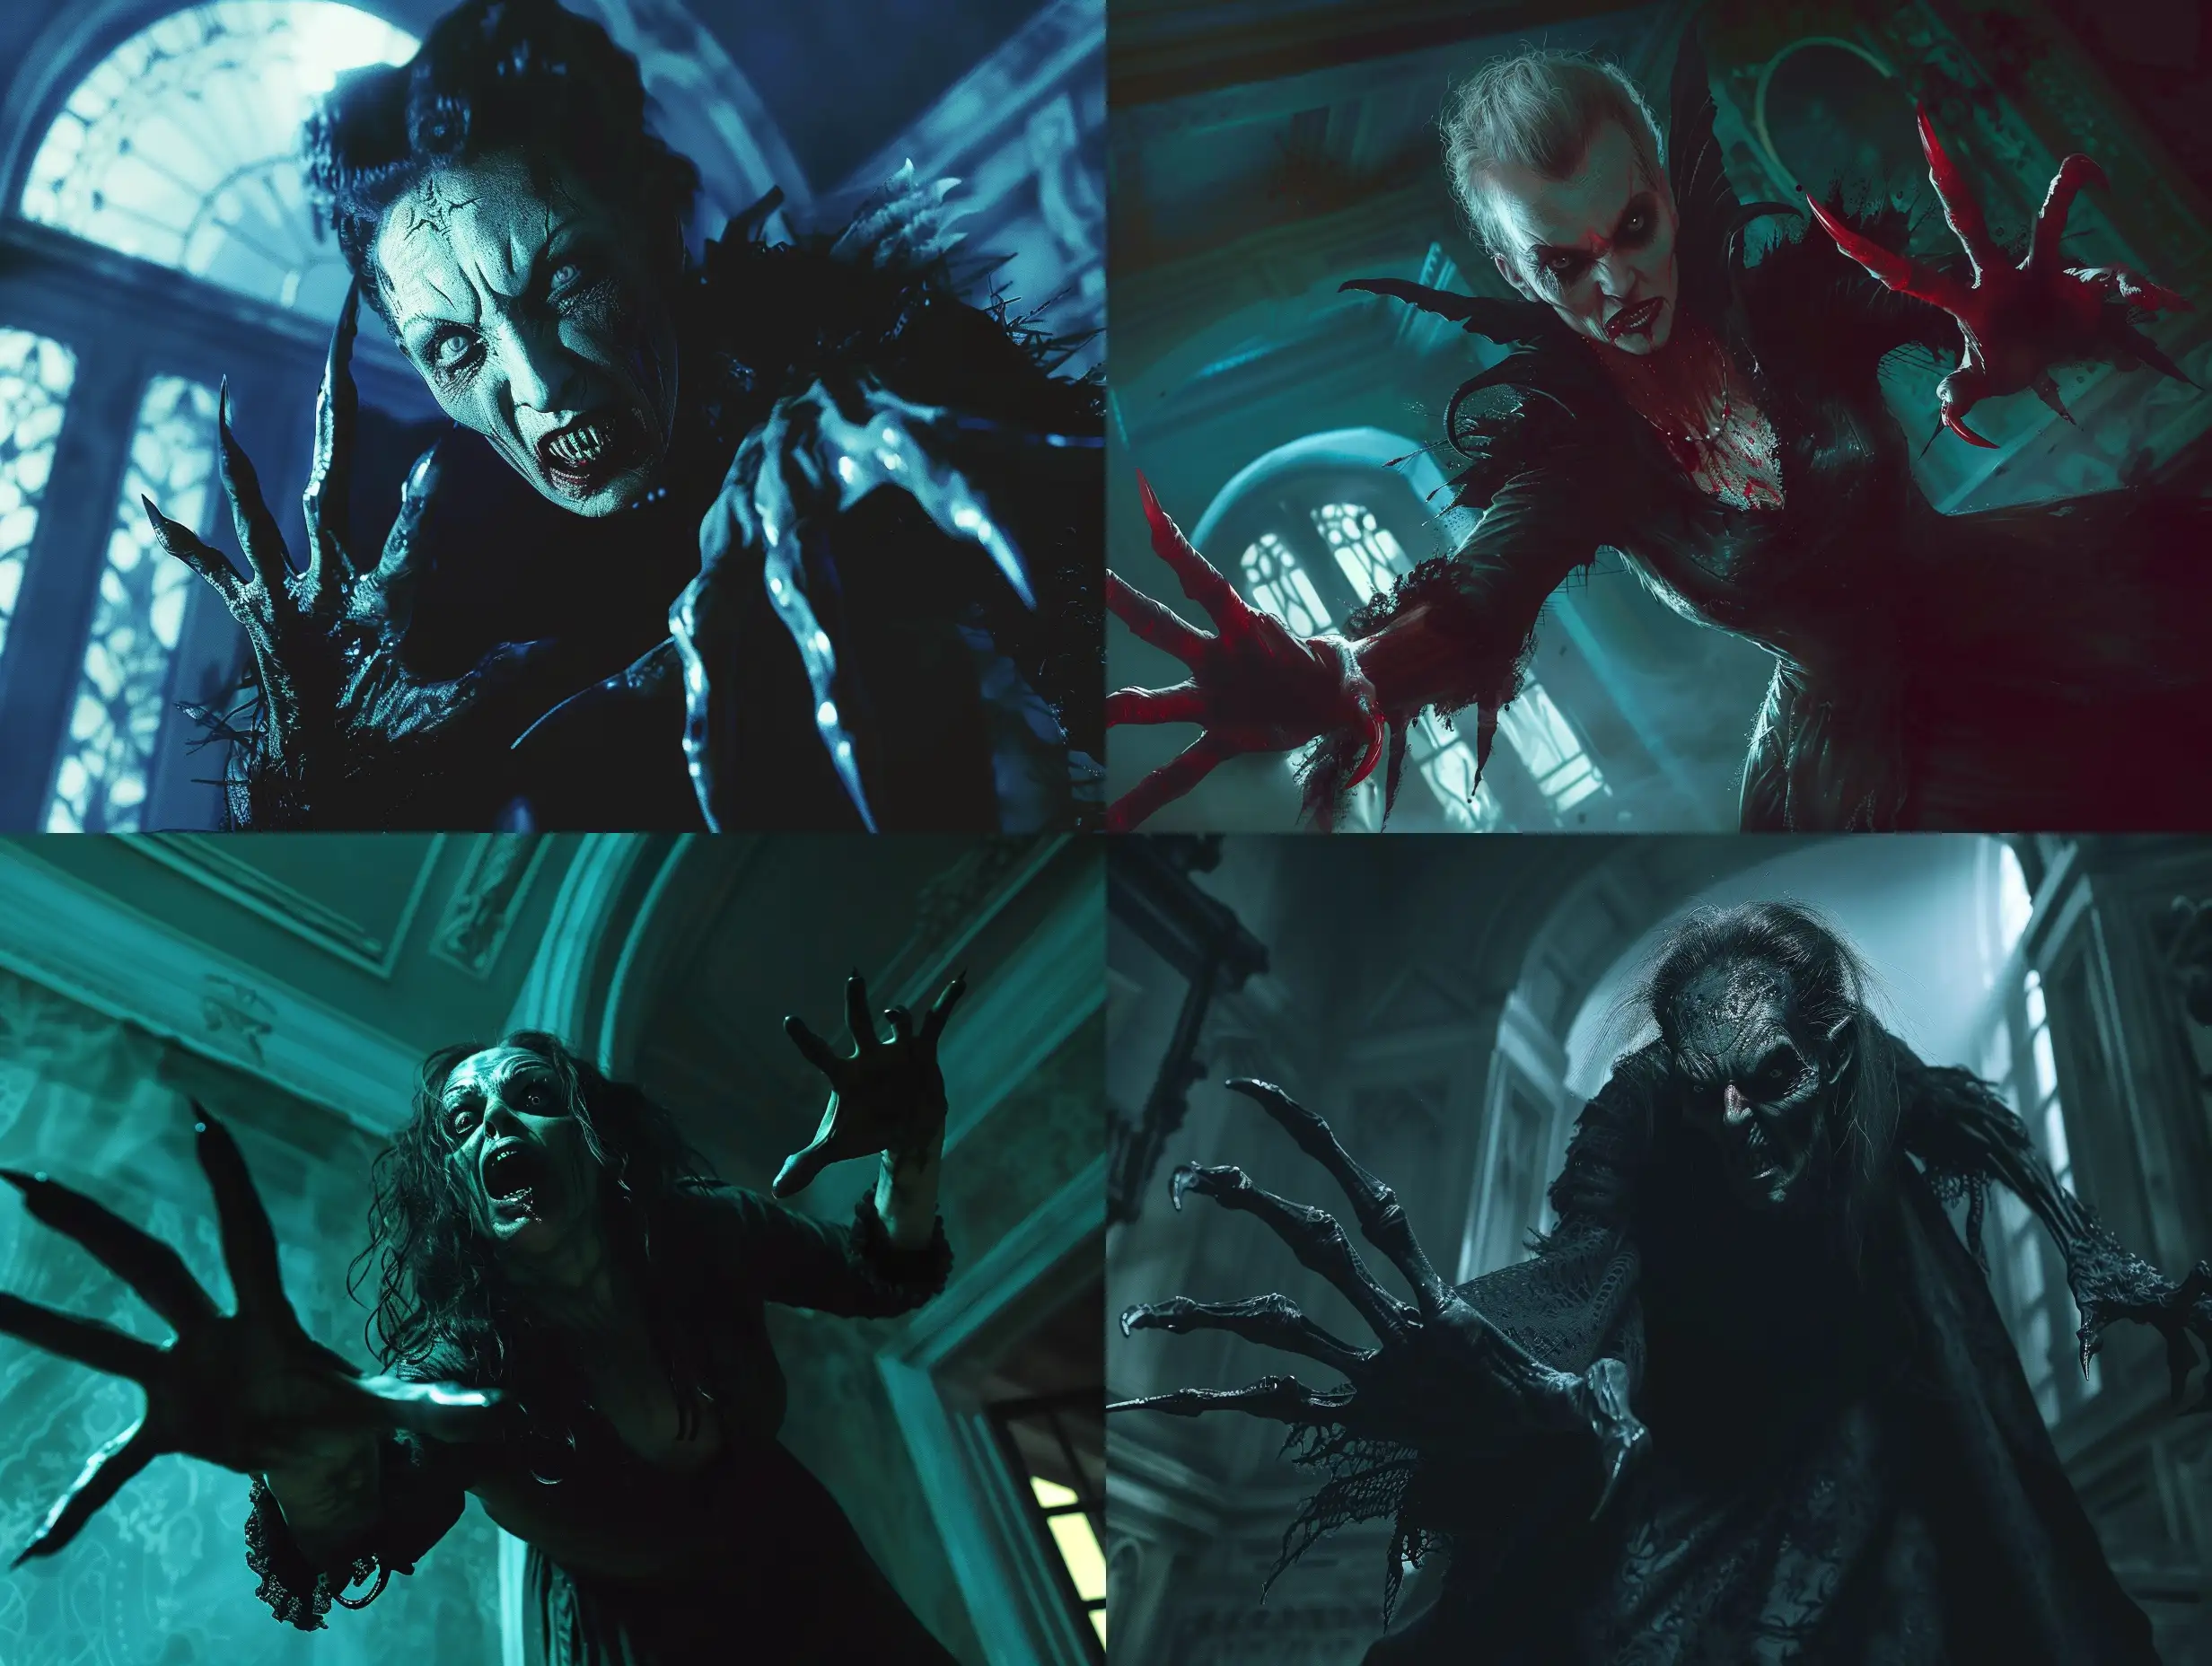 A wild and ugly vampire woman, with a menacing and terrifying presence, is the central focus of the image. Her extra-long pointed fingernails resemble sharp claws, adding to her fearsome appearance. The scene is set inside a dimly lit, eerie room, intensifying the horror element and creating a cinematic feel. The hyper-realistic style with intricate detailing captures every chilling aspect of the vampire woman's features, while the dark and haunting coloring adds to the ominous atmosphere. The atmospheric lighting heightens the creepy vibe, enhancing the sense of dread. The vampire woman's aggressive posture and terrifying expression suggest that she has just emerged from the darkness, evoking a palpable sense of suspense and fear."